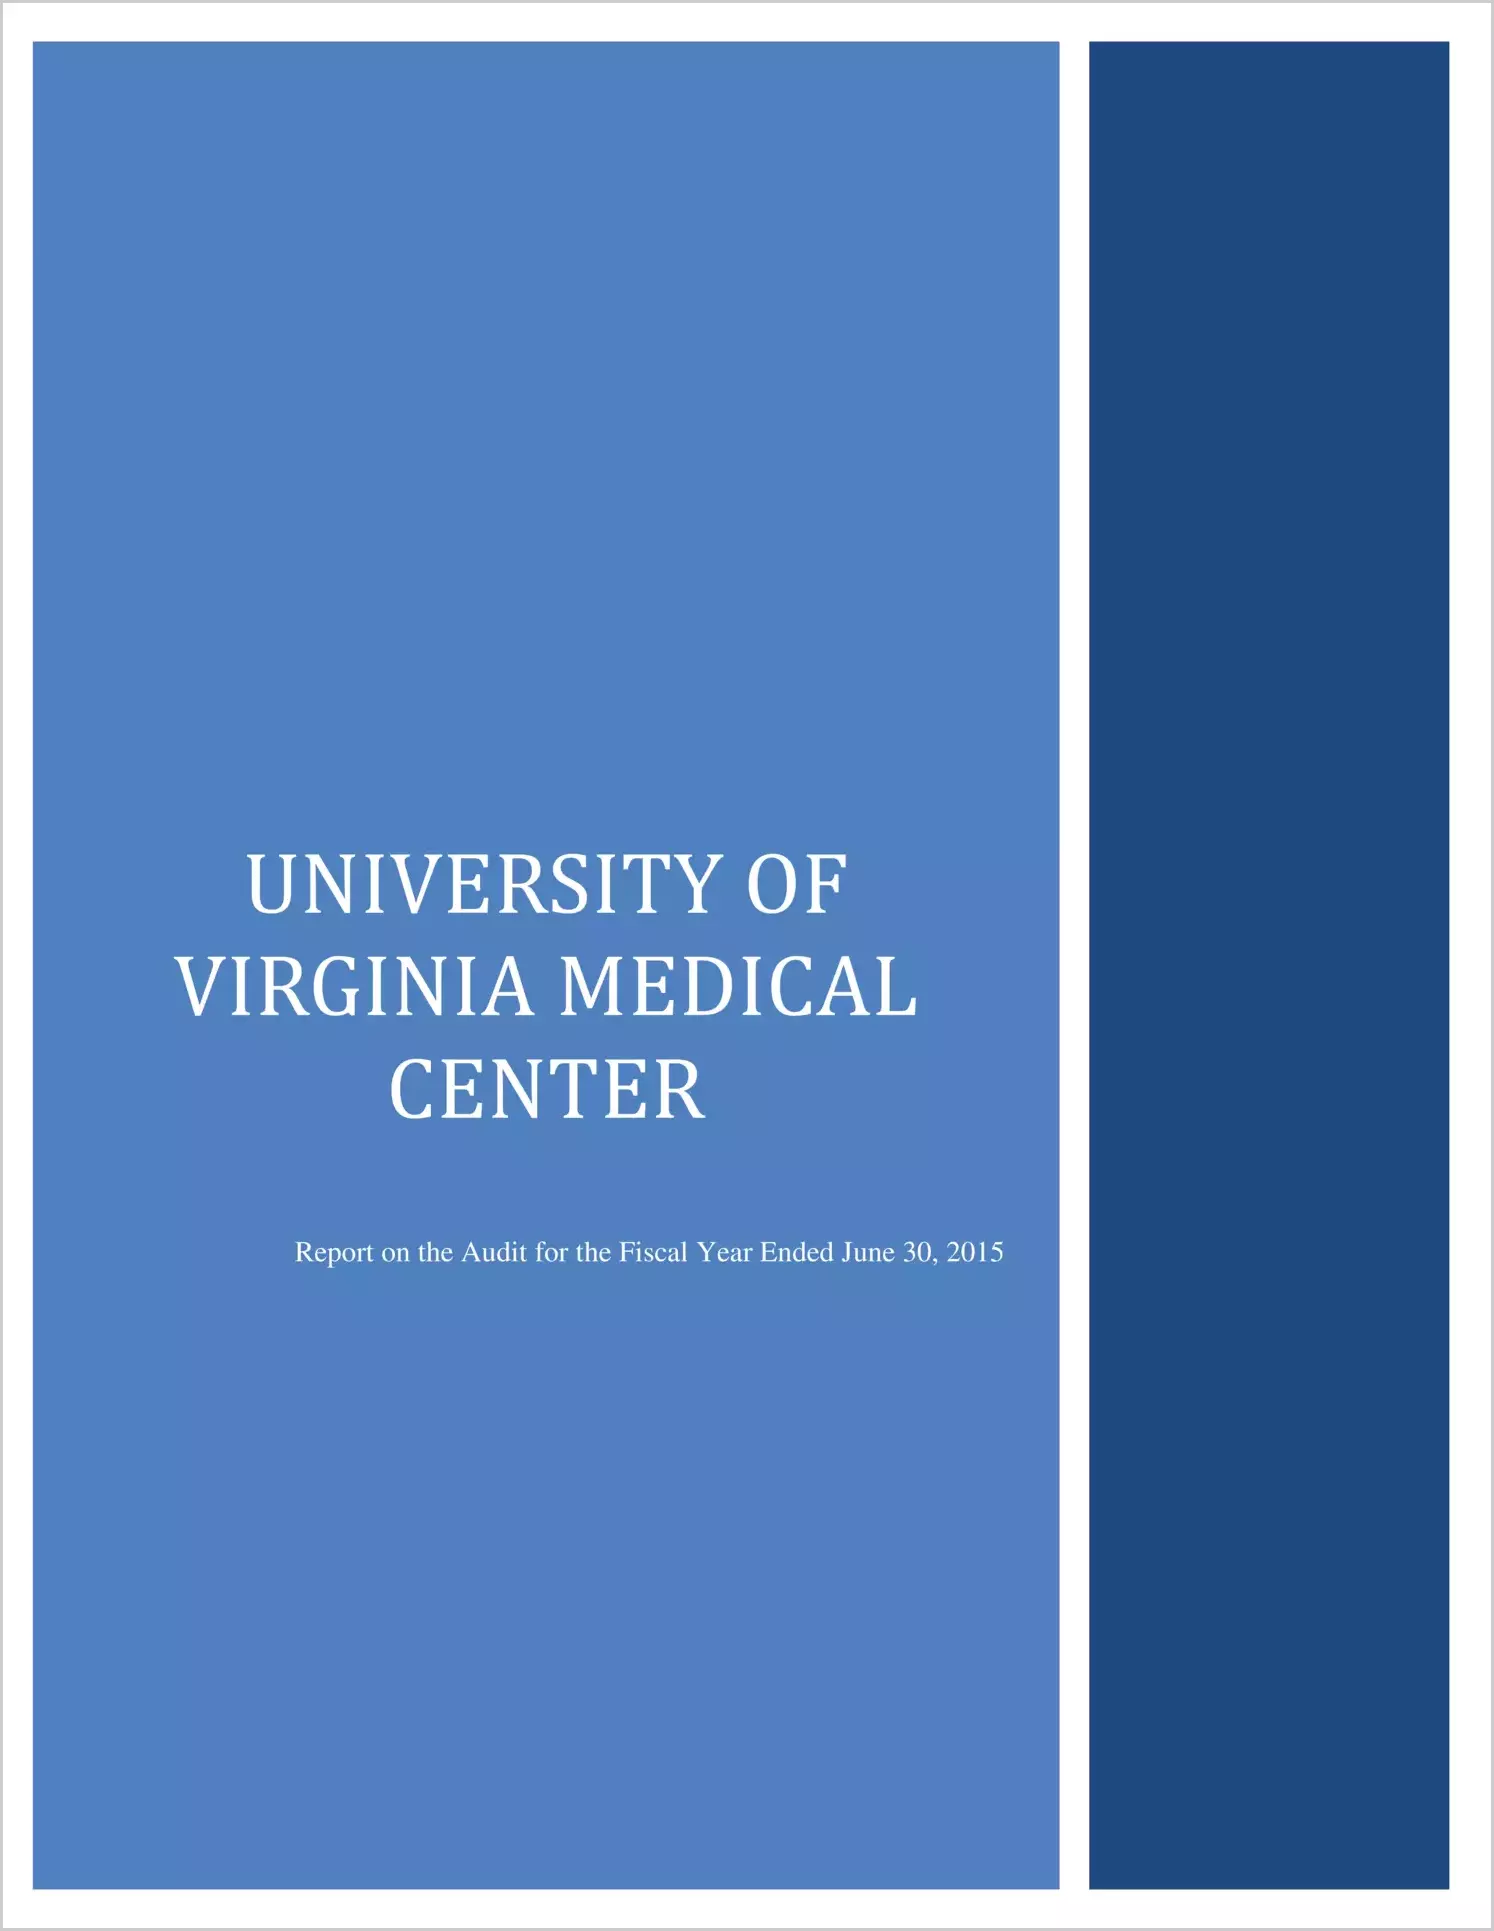 University of Virginia Medical Center Finanical Report for the year ended June 30, 2015